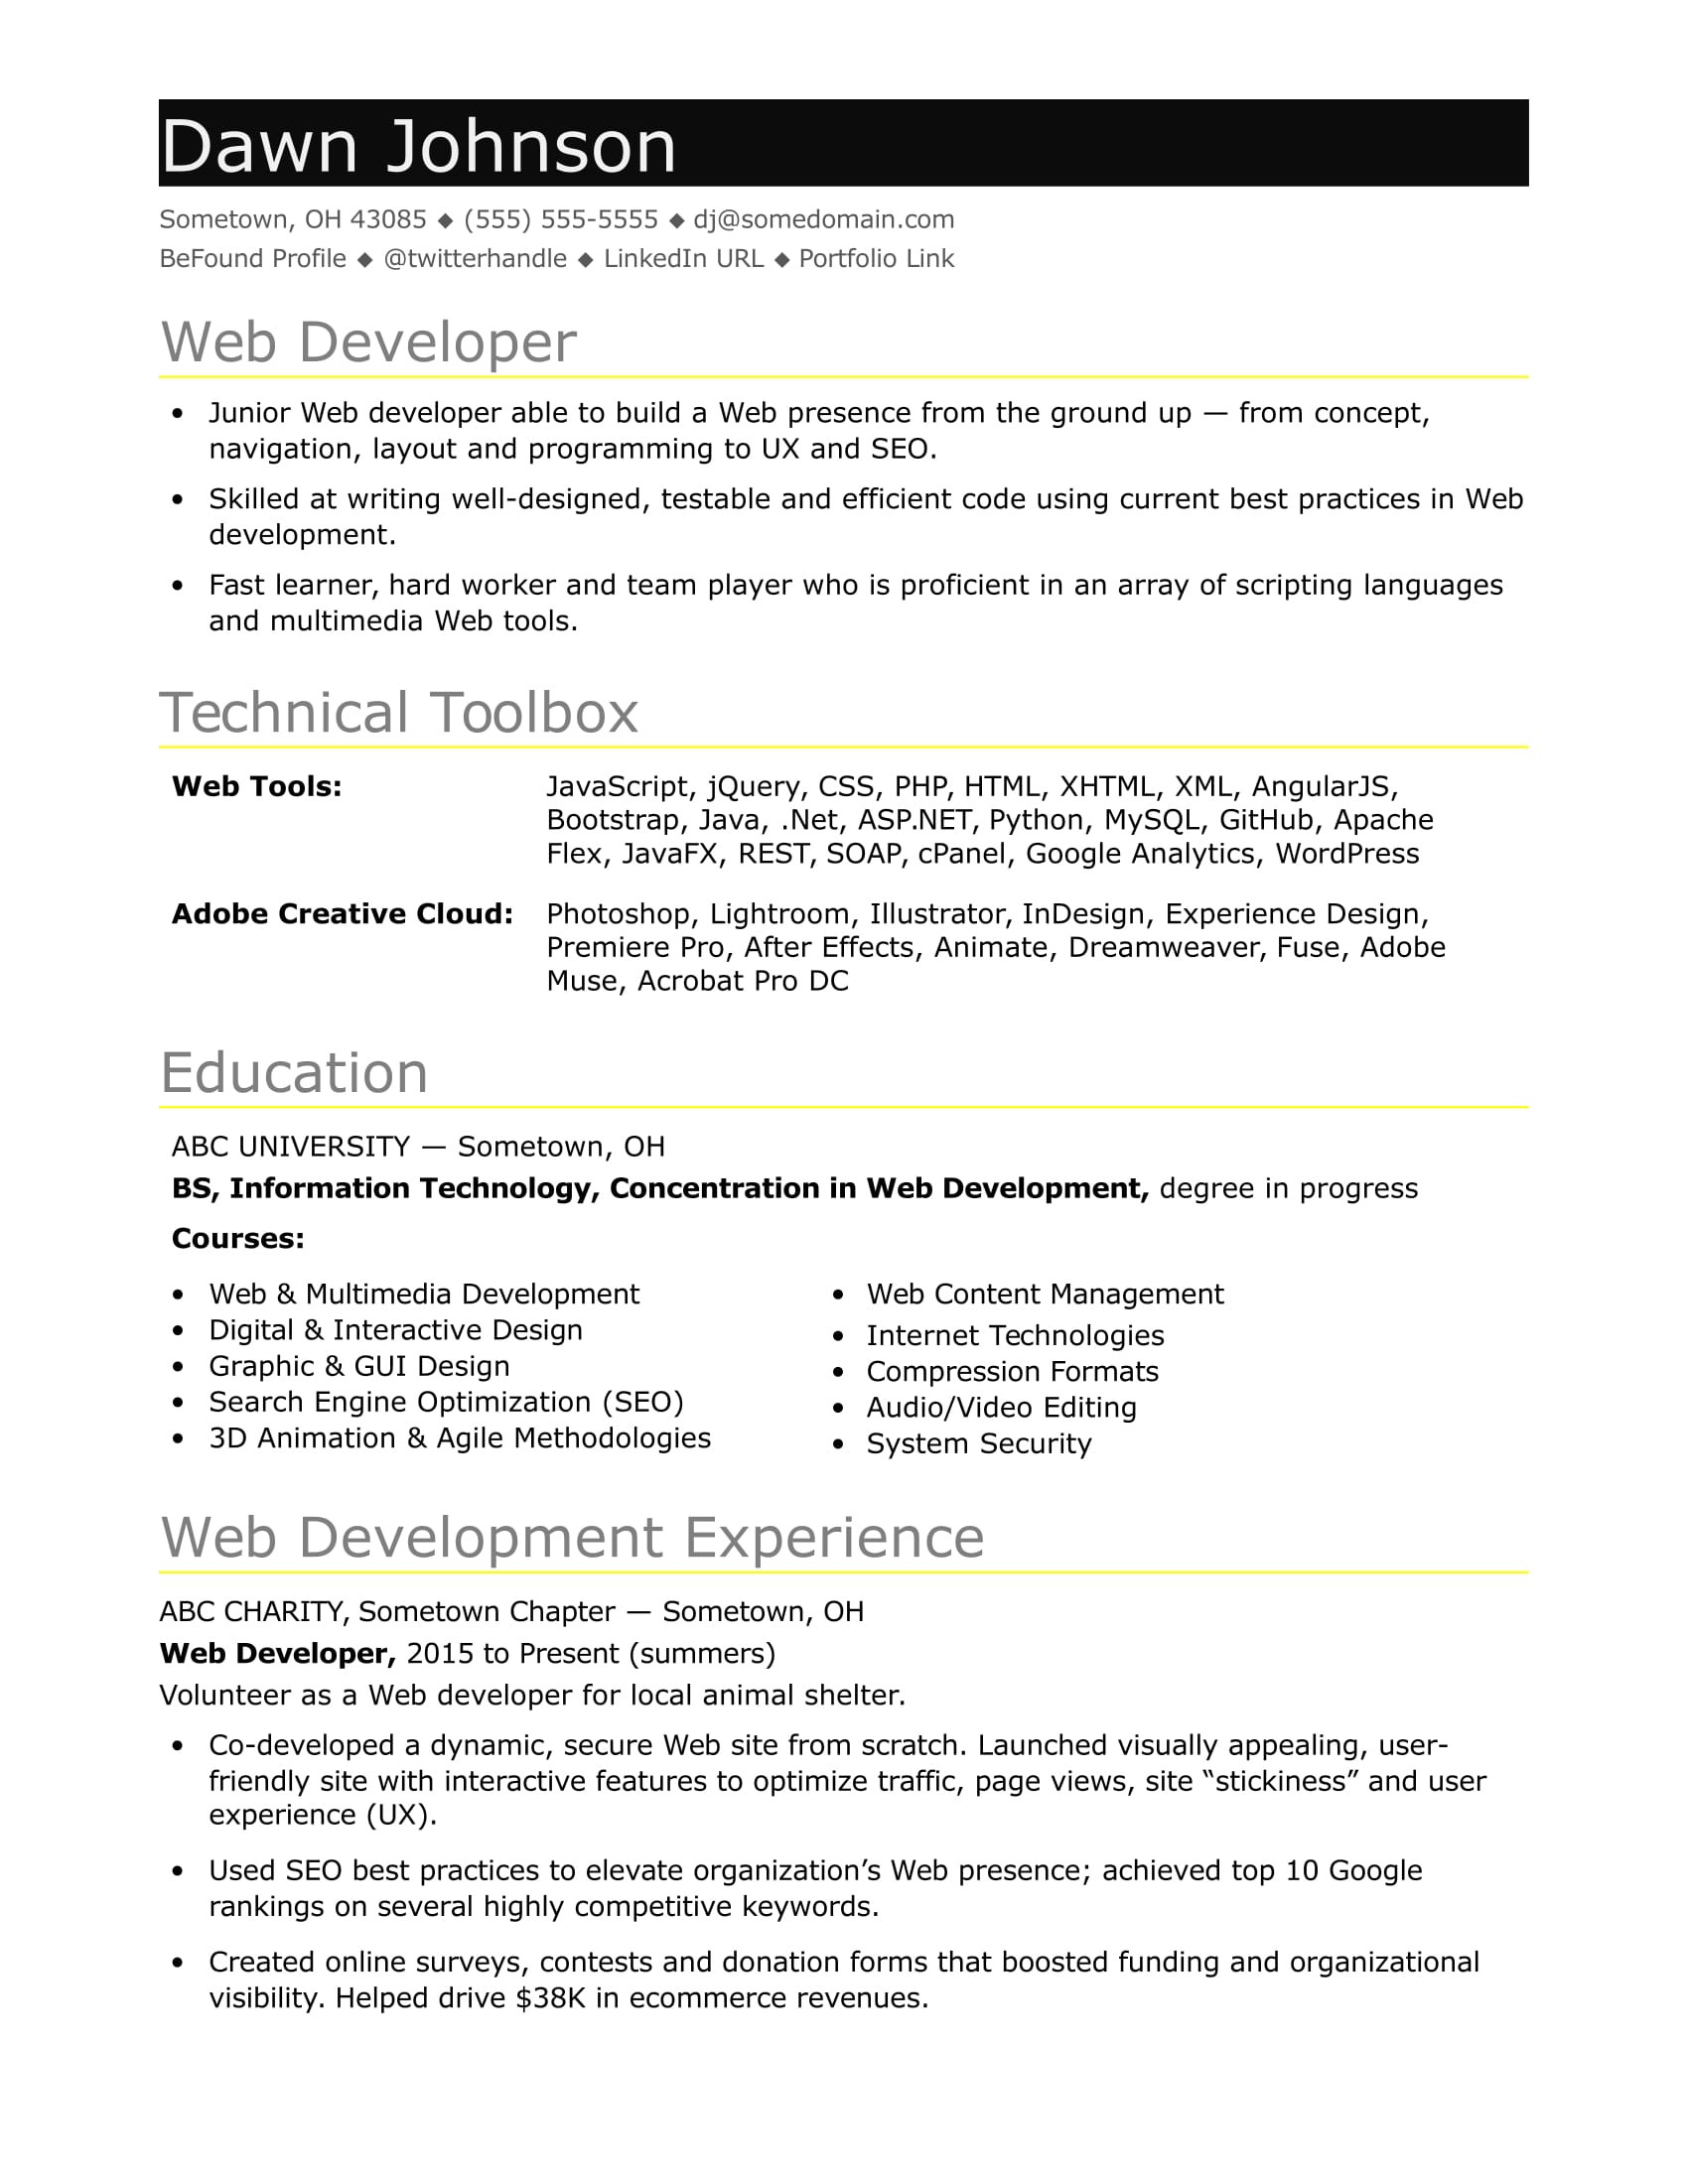 Resume Samples for Entry Level It Positions Sample Resume for An Entry-level It Developer Monster.com